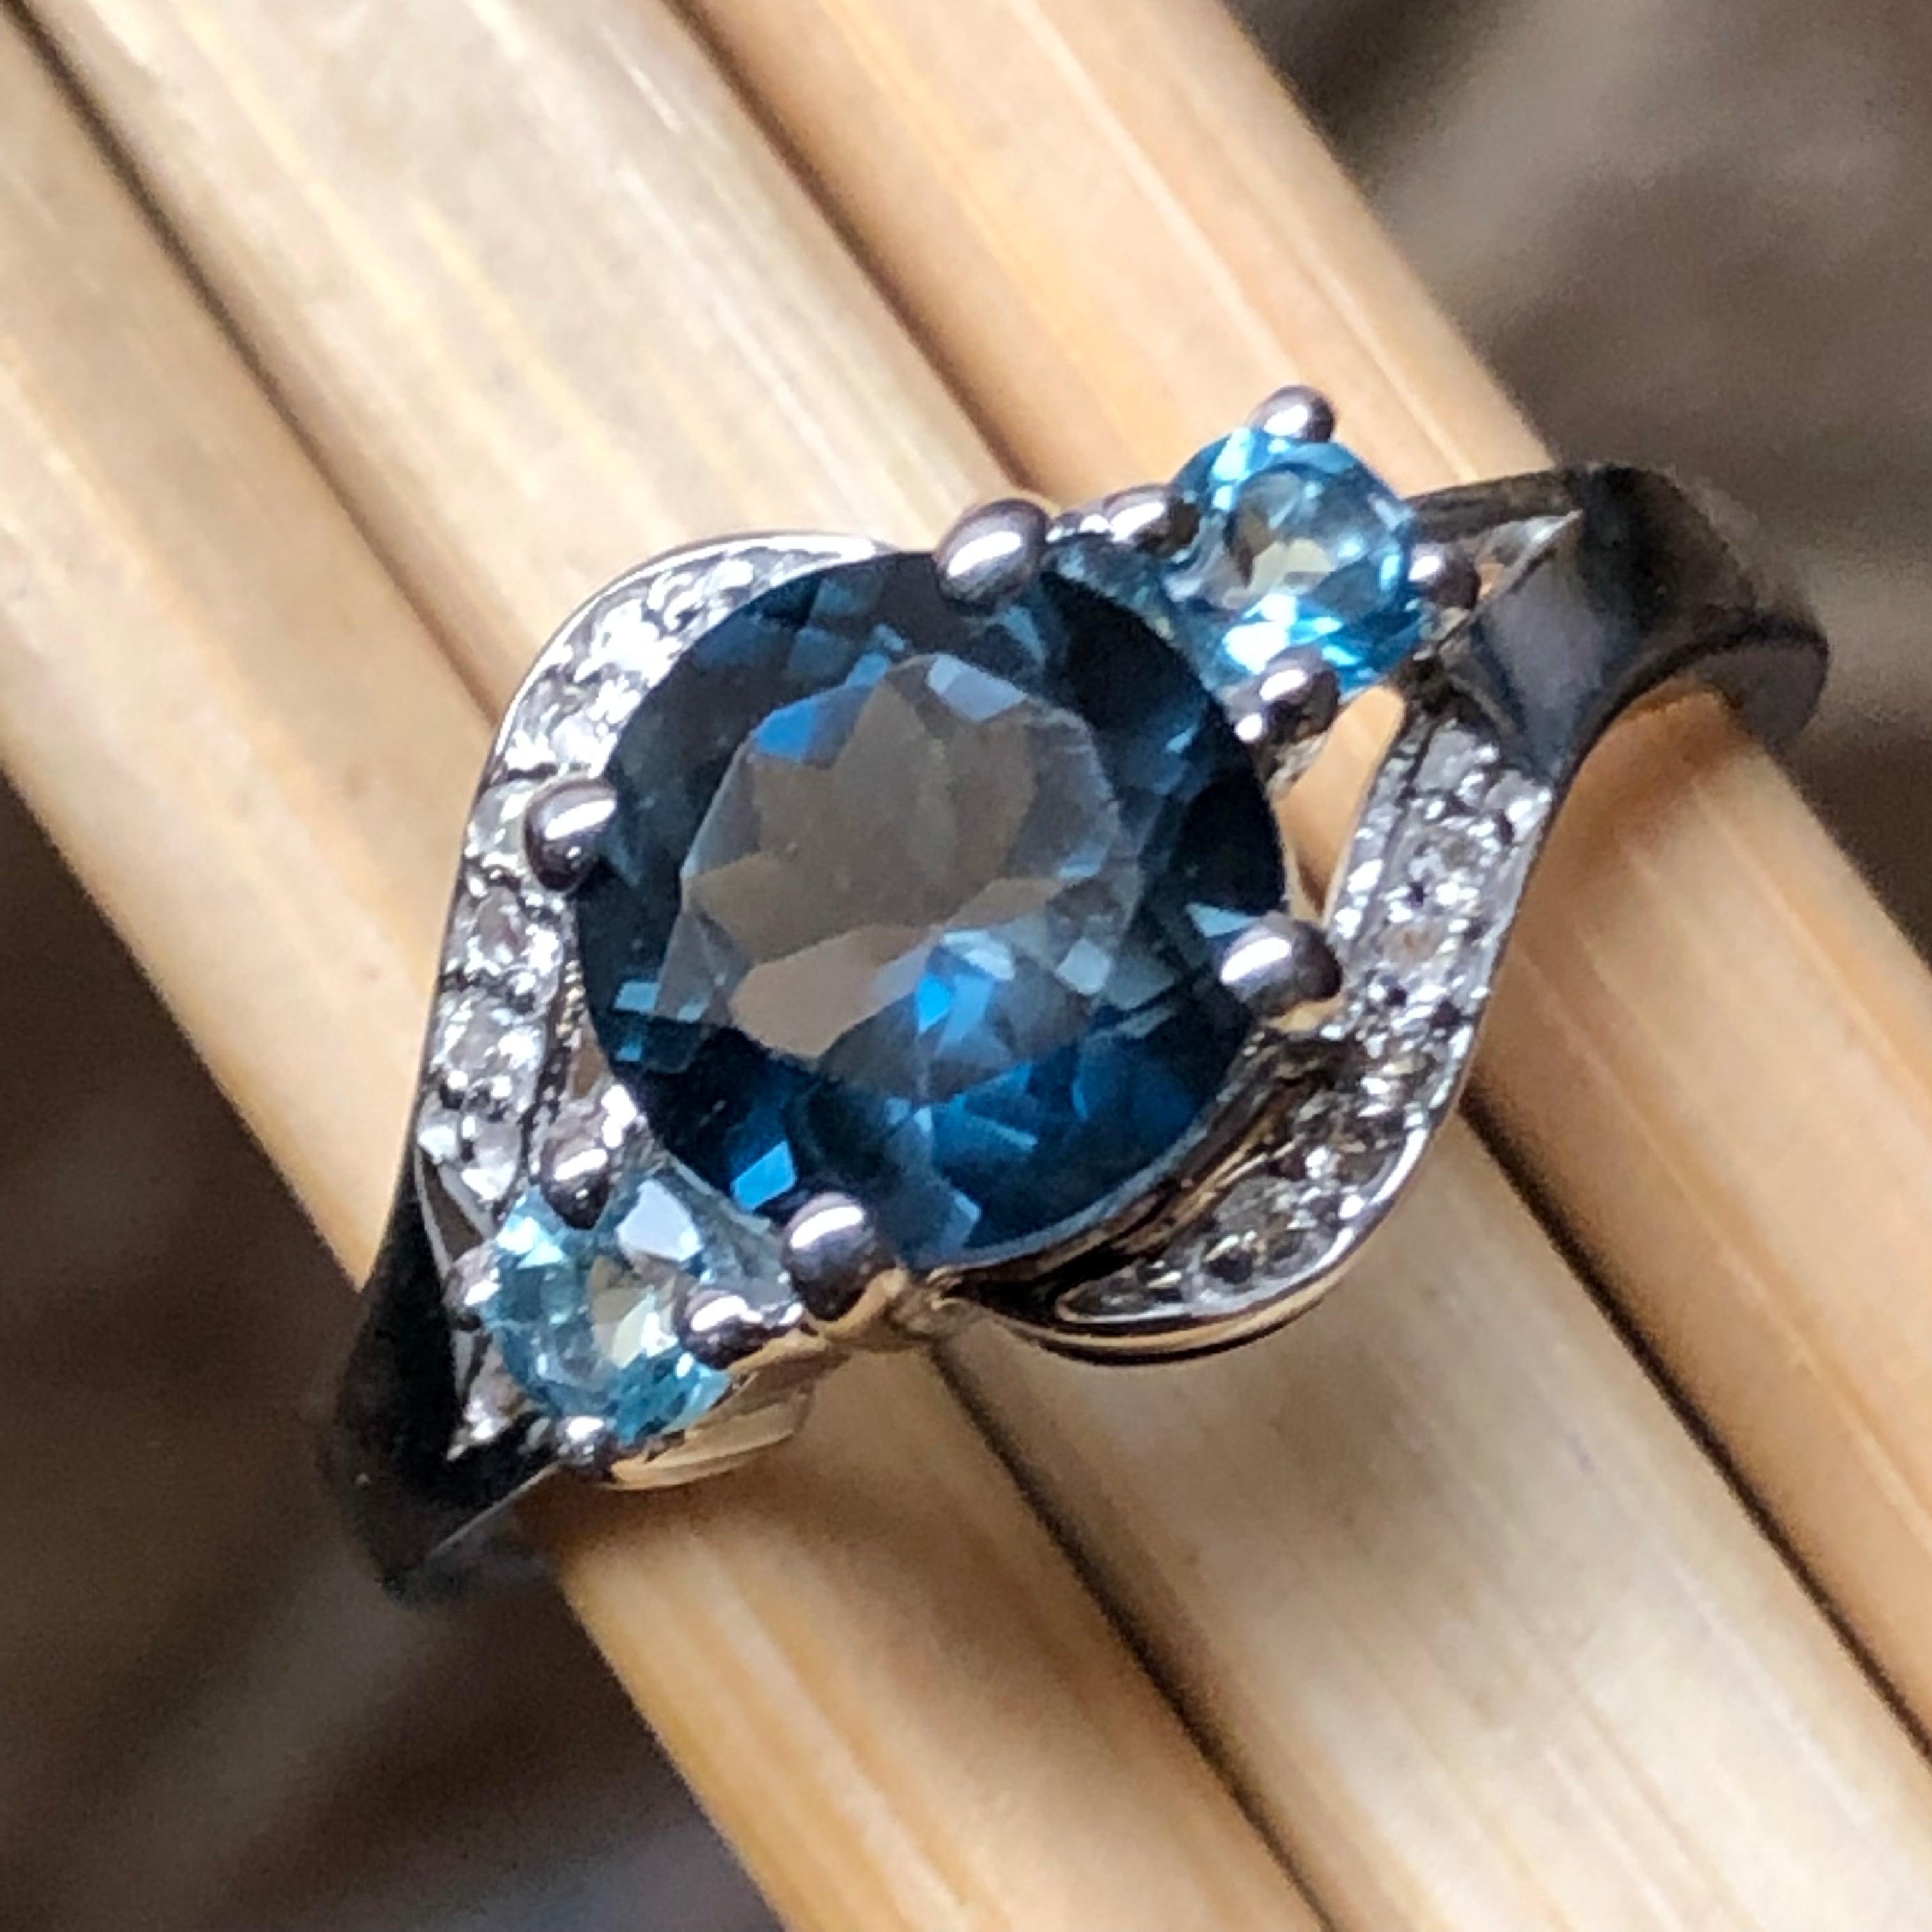 Natural 2ct London Blue Topaz, White Topaz 925 Solid Sterling Silver Engagement Ring Size 6, 7, 8, 9 - Natural Rocks by Kala